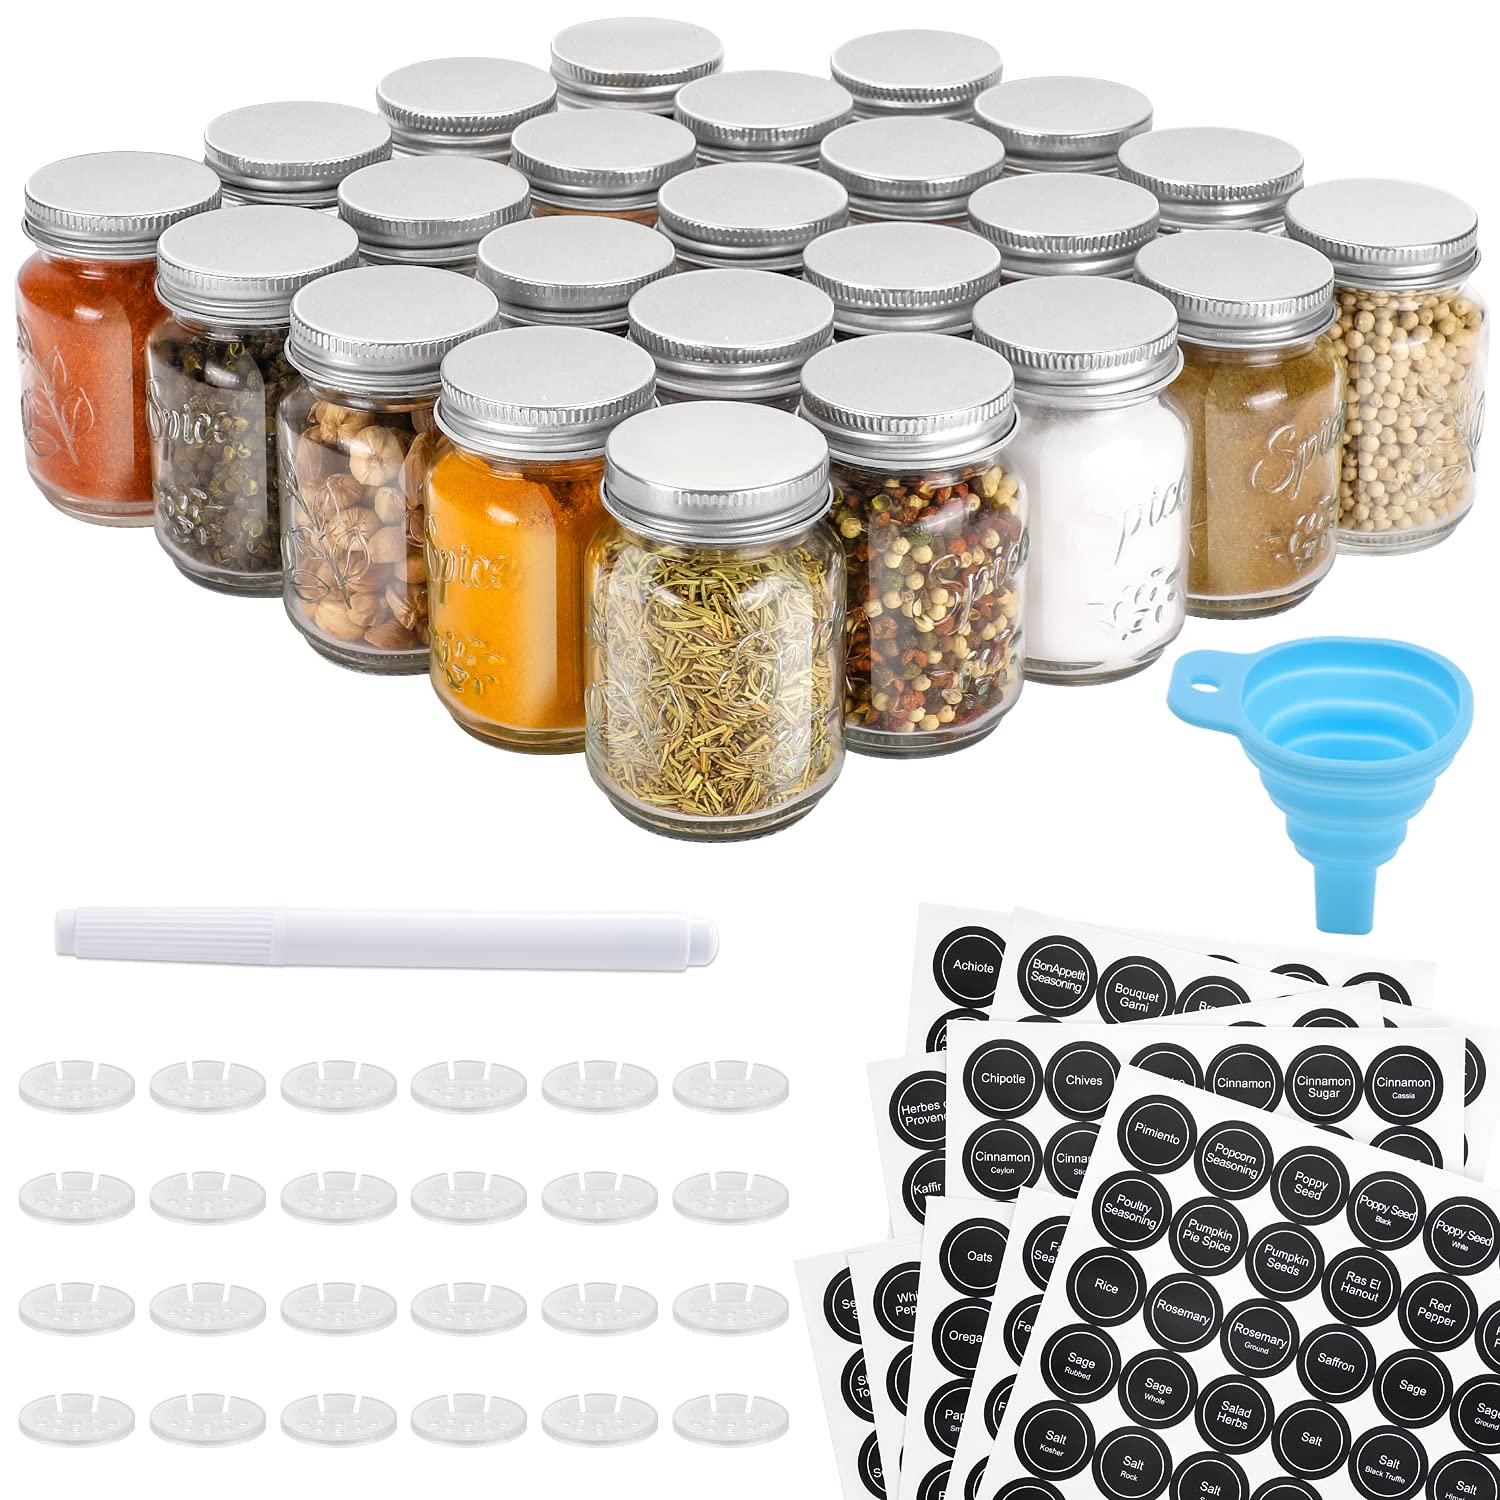 AOZITA 24 Pcs Glass Mason Spice Jars/Bottles - 4oz Empty Spice Containers with Spice Labels - Shaker Lids and Airtight Metal Caps - Silicone Collap...